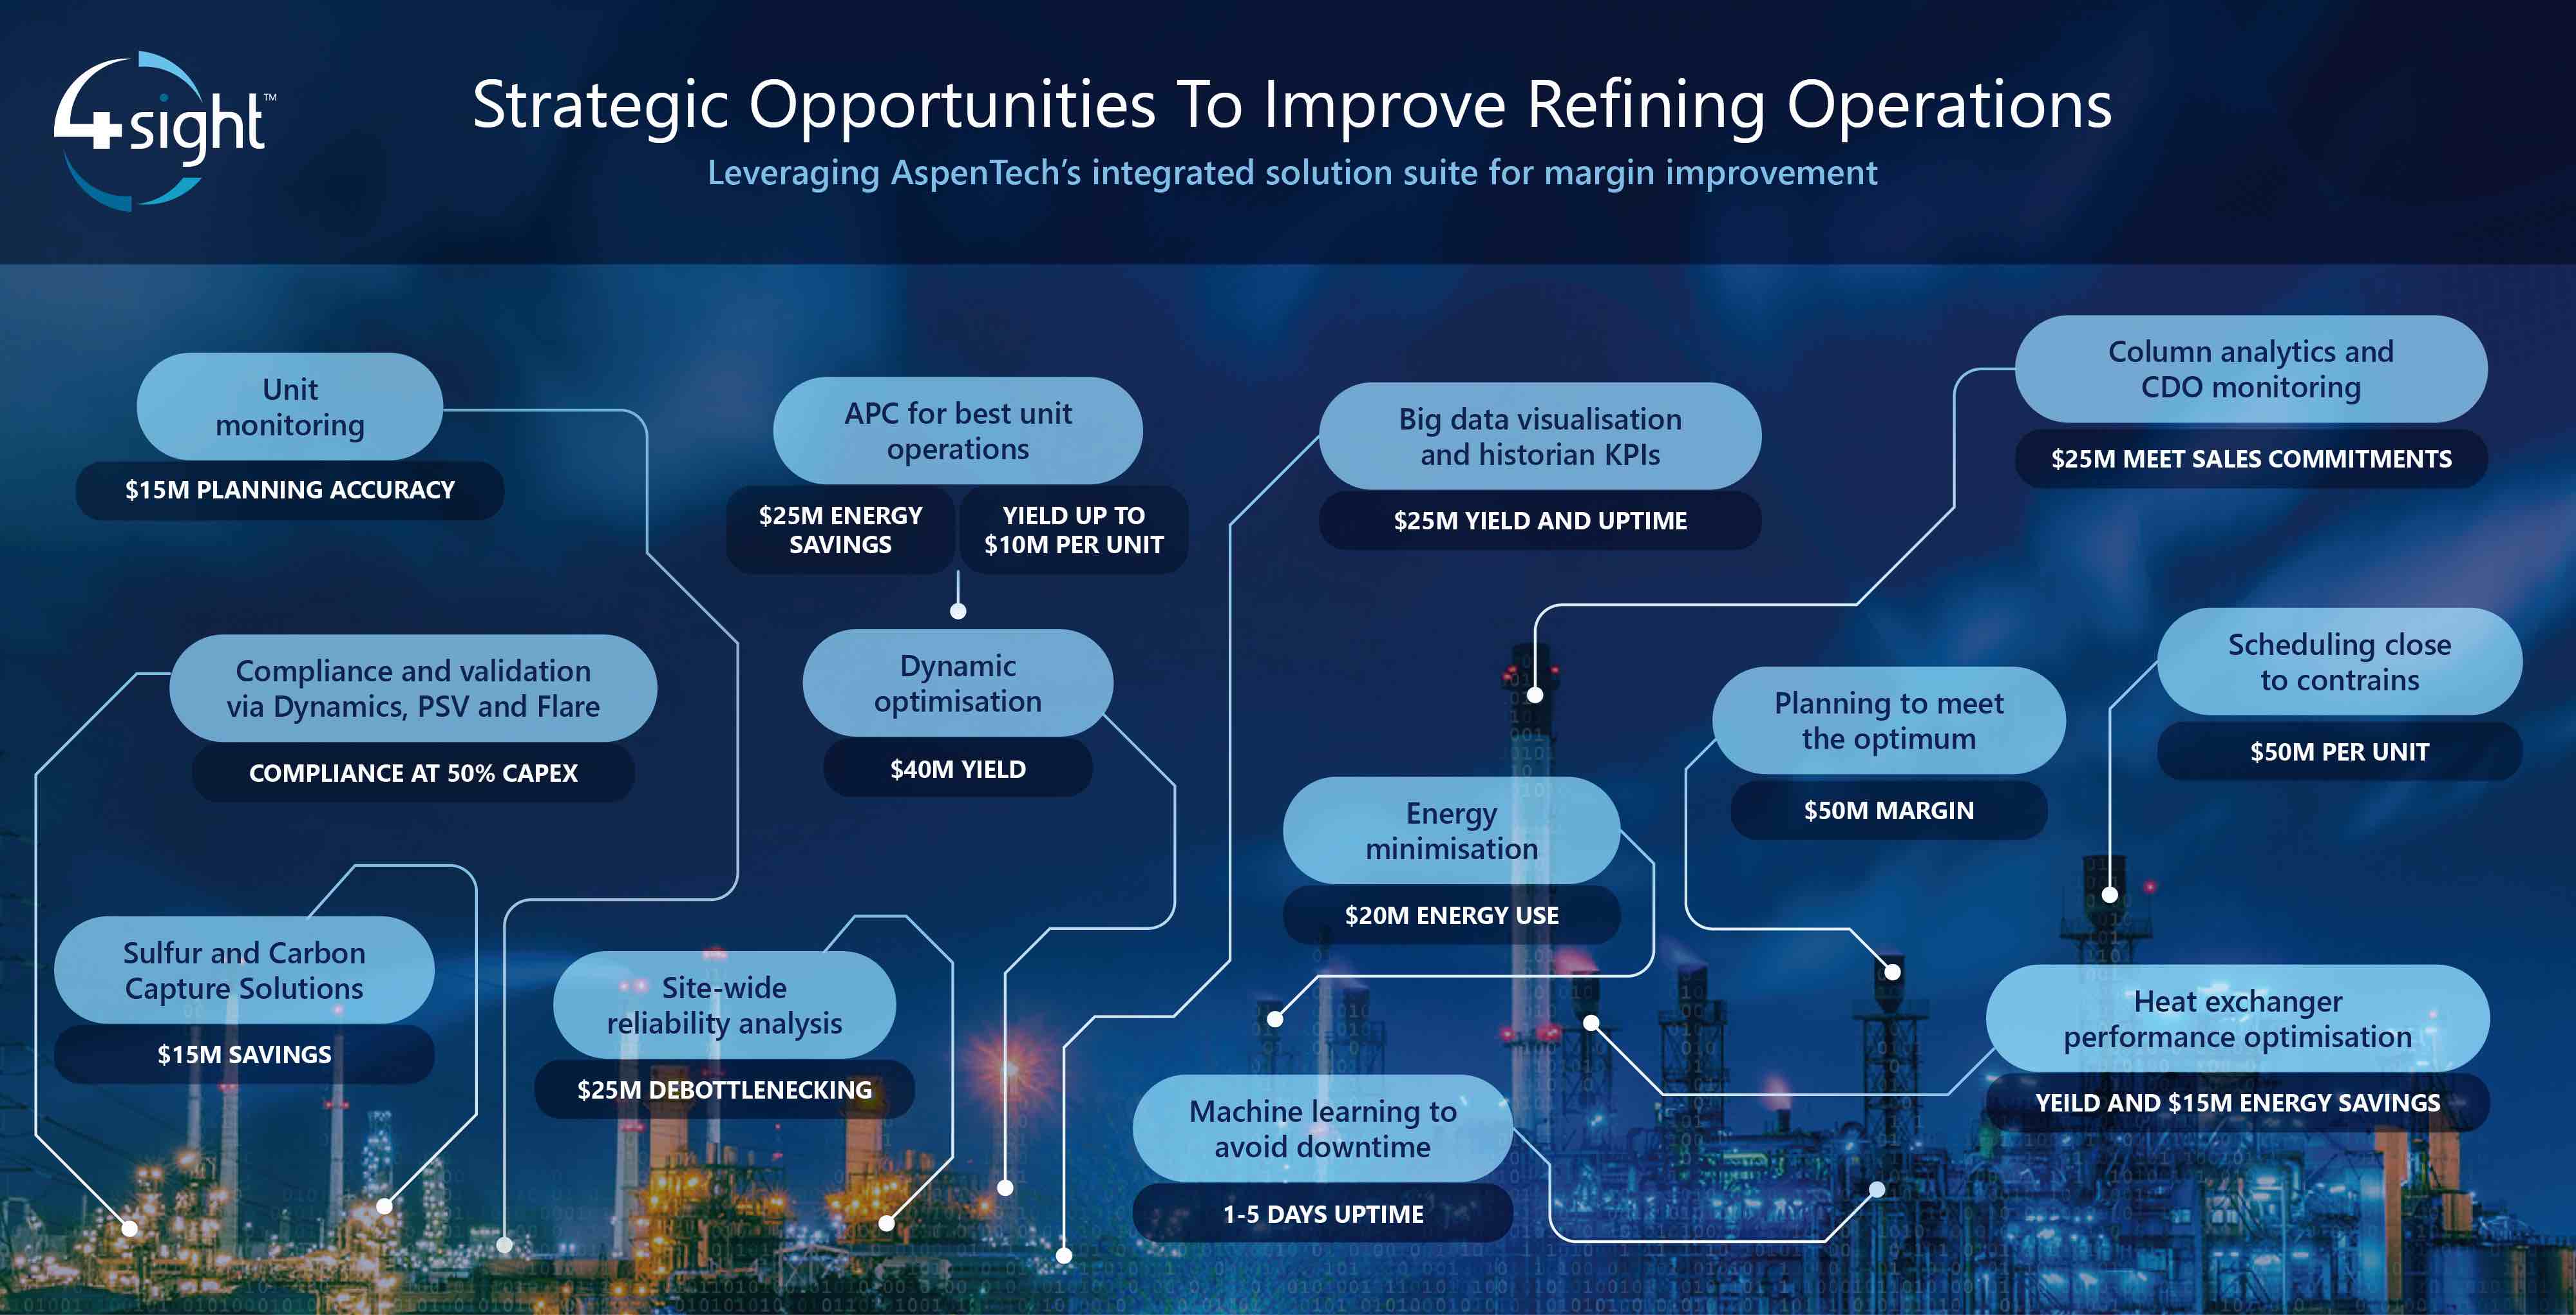 4Sight OT Strategic Opportunities to Improve Refining Operations Infographic web